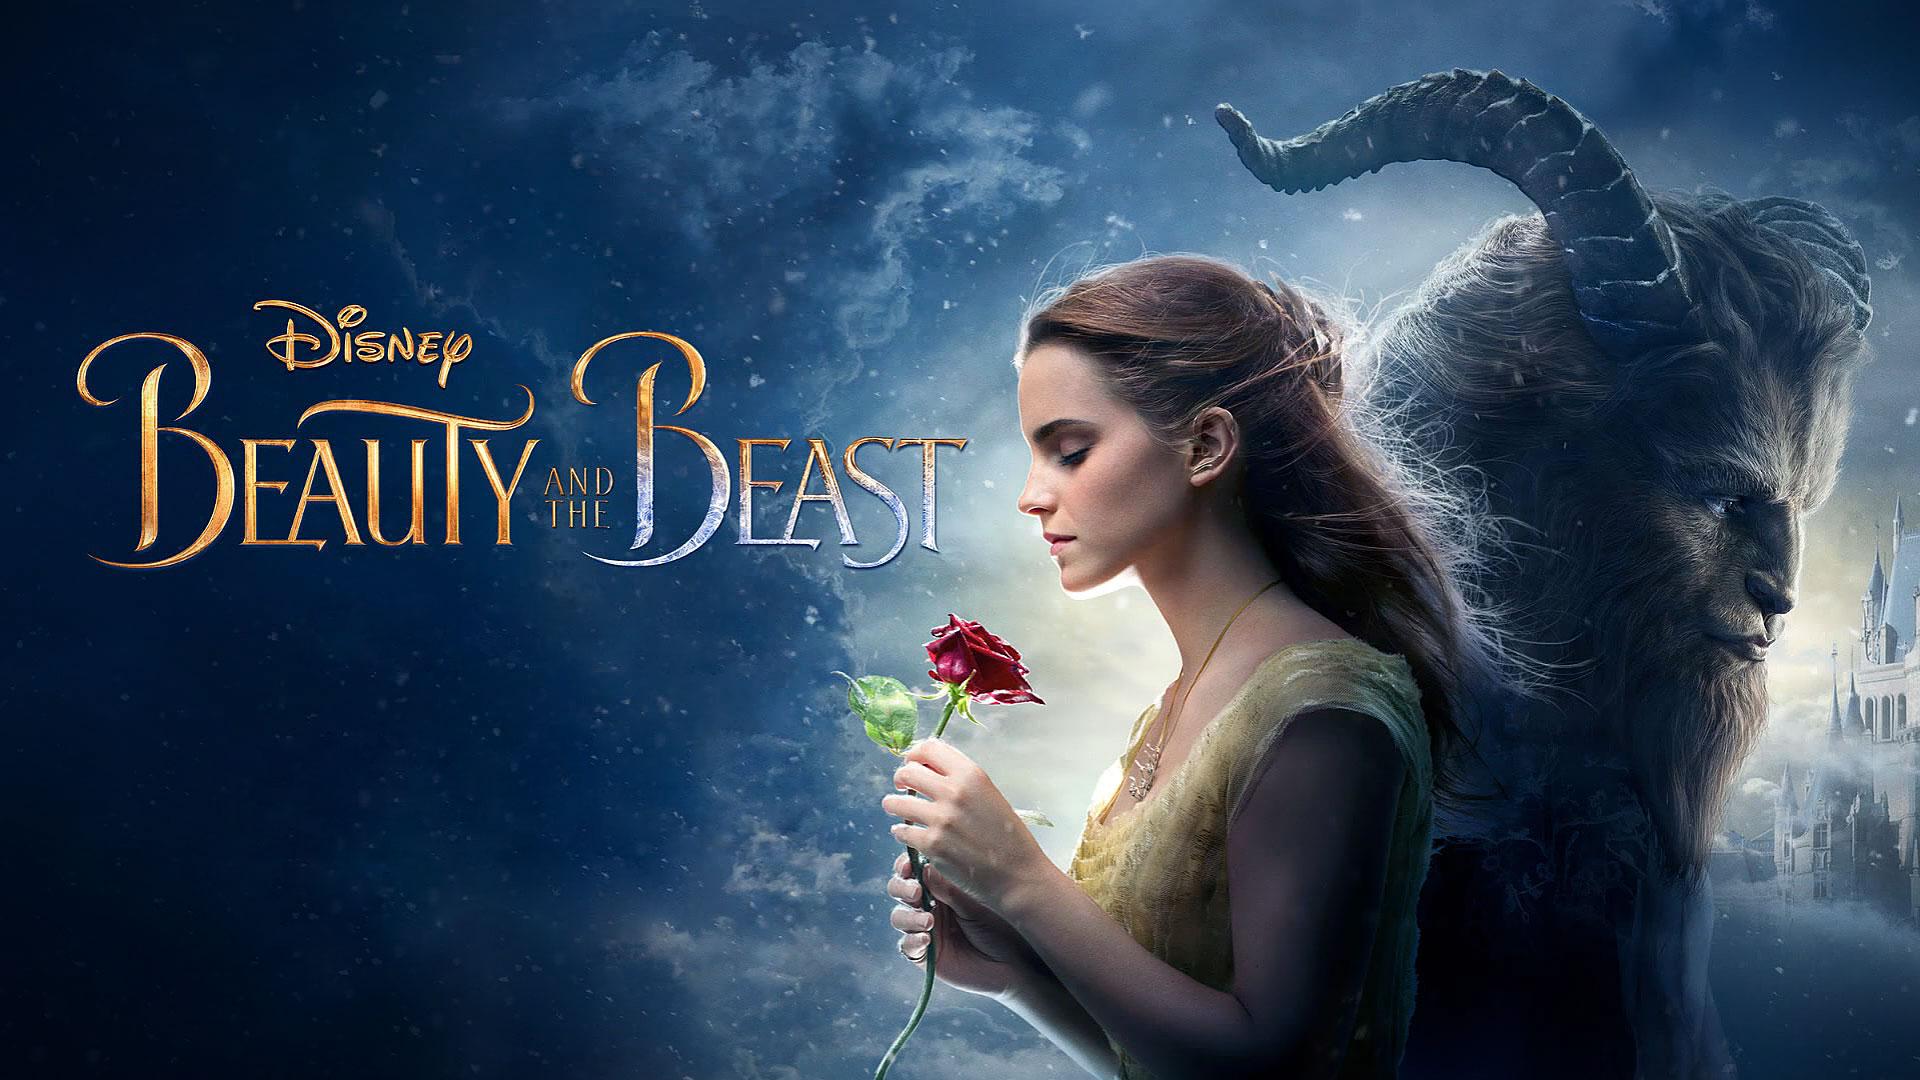 Beauty and the beast Wallpaper